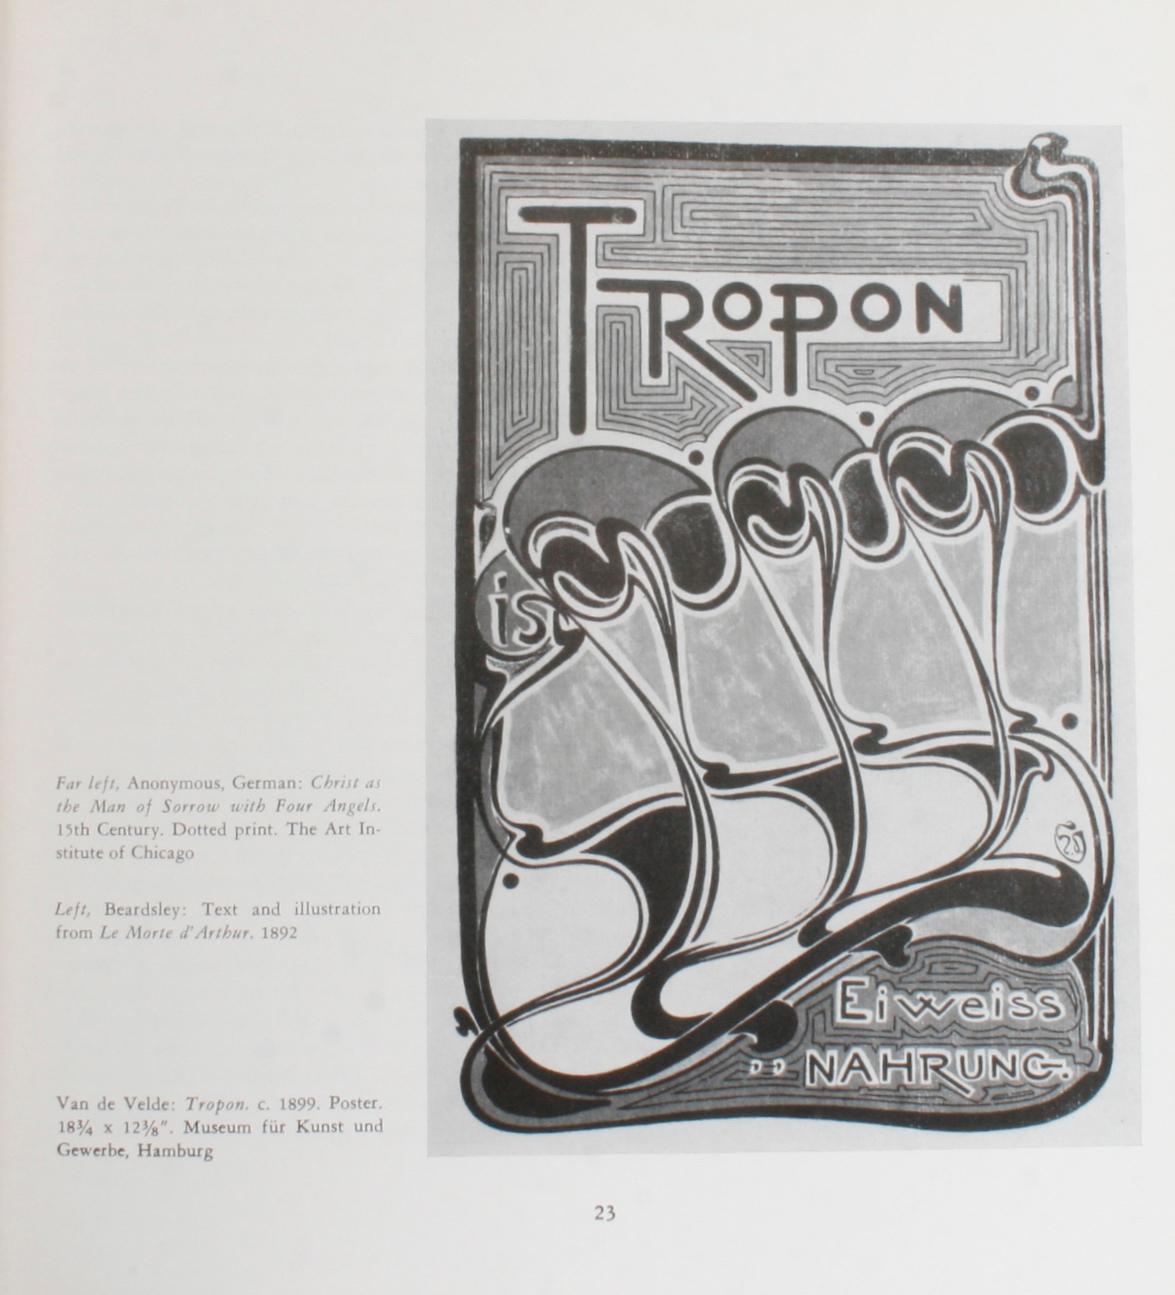 Paper Art Nouveau, Art Design at the Turn of the Century, Firstst Edition